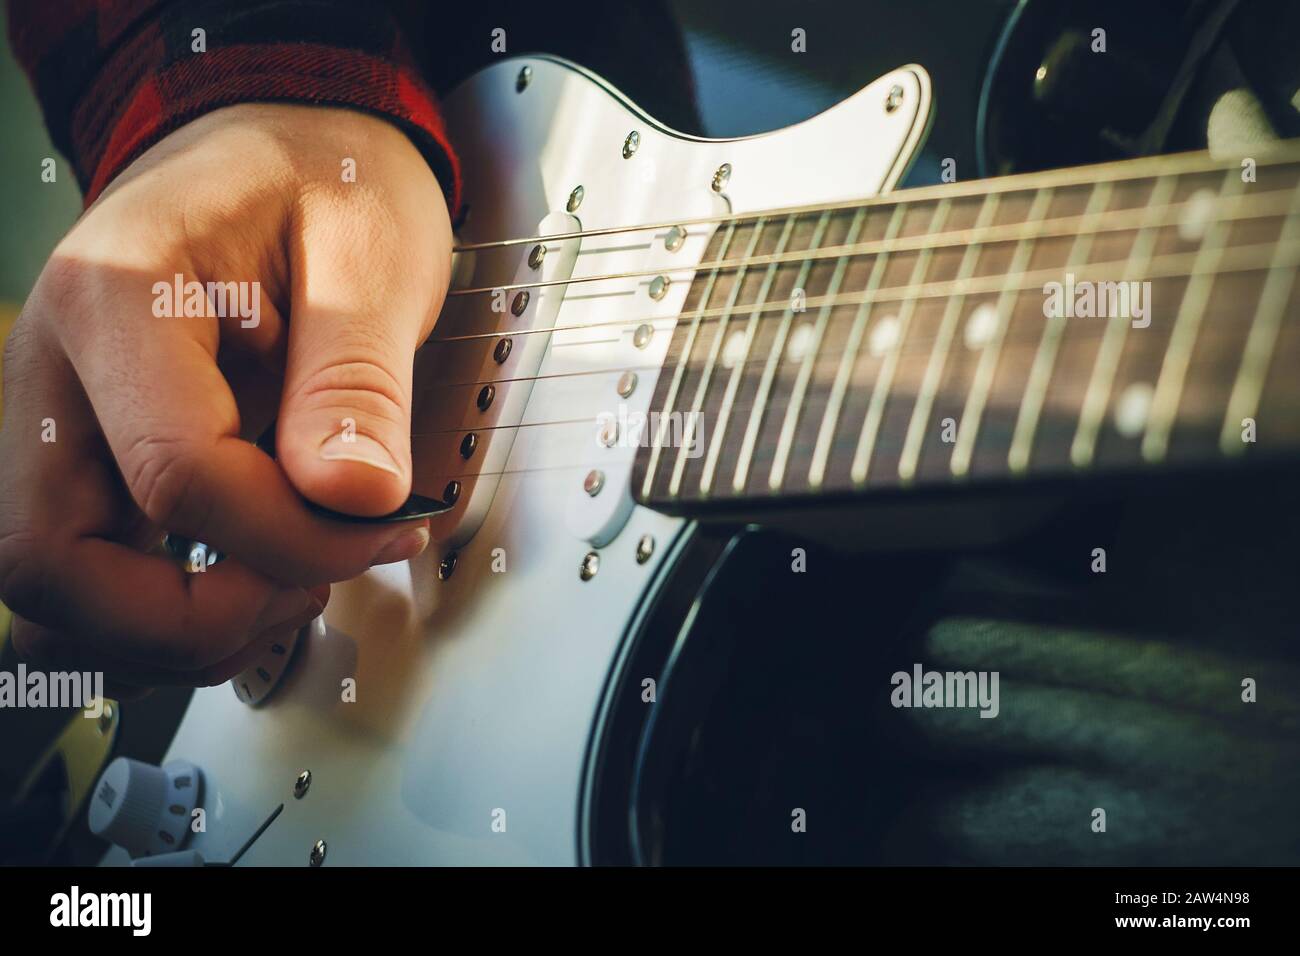 A musician in a red checked jacket plays with a mediator in his hand on the strings of an electronic black-and-white guitar, which is illuminated by a Stock Photo